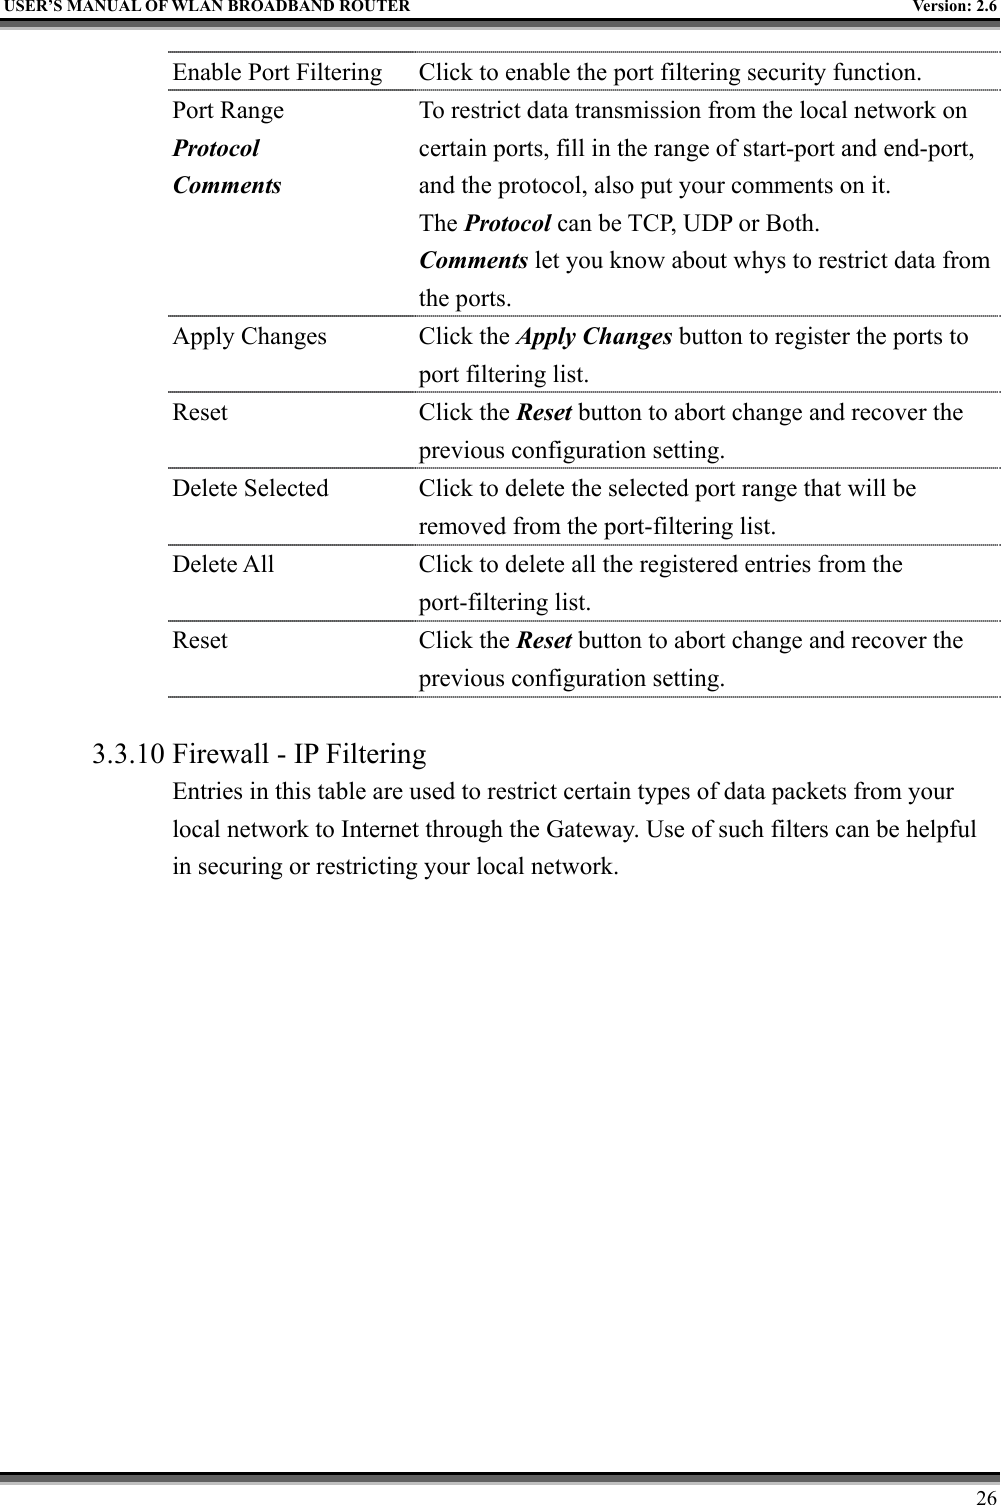   USER’S MANUAL OF WLAN BROADBAND ROUTER    Version: 2.6     26   Enable Port Filtering  Click to enable the port filtering security function. Port Range Protocol Comments To restrict data transmission from the local network on certain ports, fill in the range of start-port and end-port, and the protocol, also put your comments on it. The Protocol can be TCP, UDP or Both. Comments let you know about whys to restrict data from the ports. Apply Changes  Click the Apply Changes button to register the ports to port filtering list. Reset Click the Reset button to abort change and recover the previous configuration setting. Delete Selected  Click to delete the selected port range that will be removed from the port-filtering list. Delete All  Click to delete all the registered entries from the port-filtering list.   Reset Click the Reset button to abort change and recover the previous configuration setting.  3.3.10 Firewall - IP Filtering Entries in this table are used to restrict certain types of data packets from your local network to Internet through the Gateway. Use of such filters can be helpful in securing or restricting your local network.  